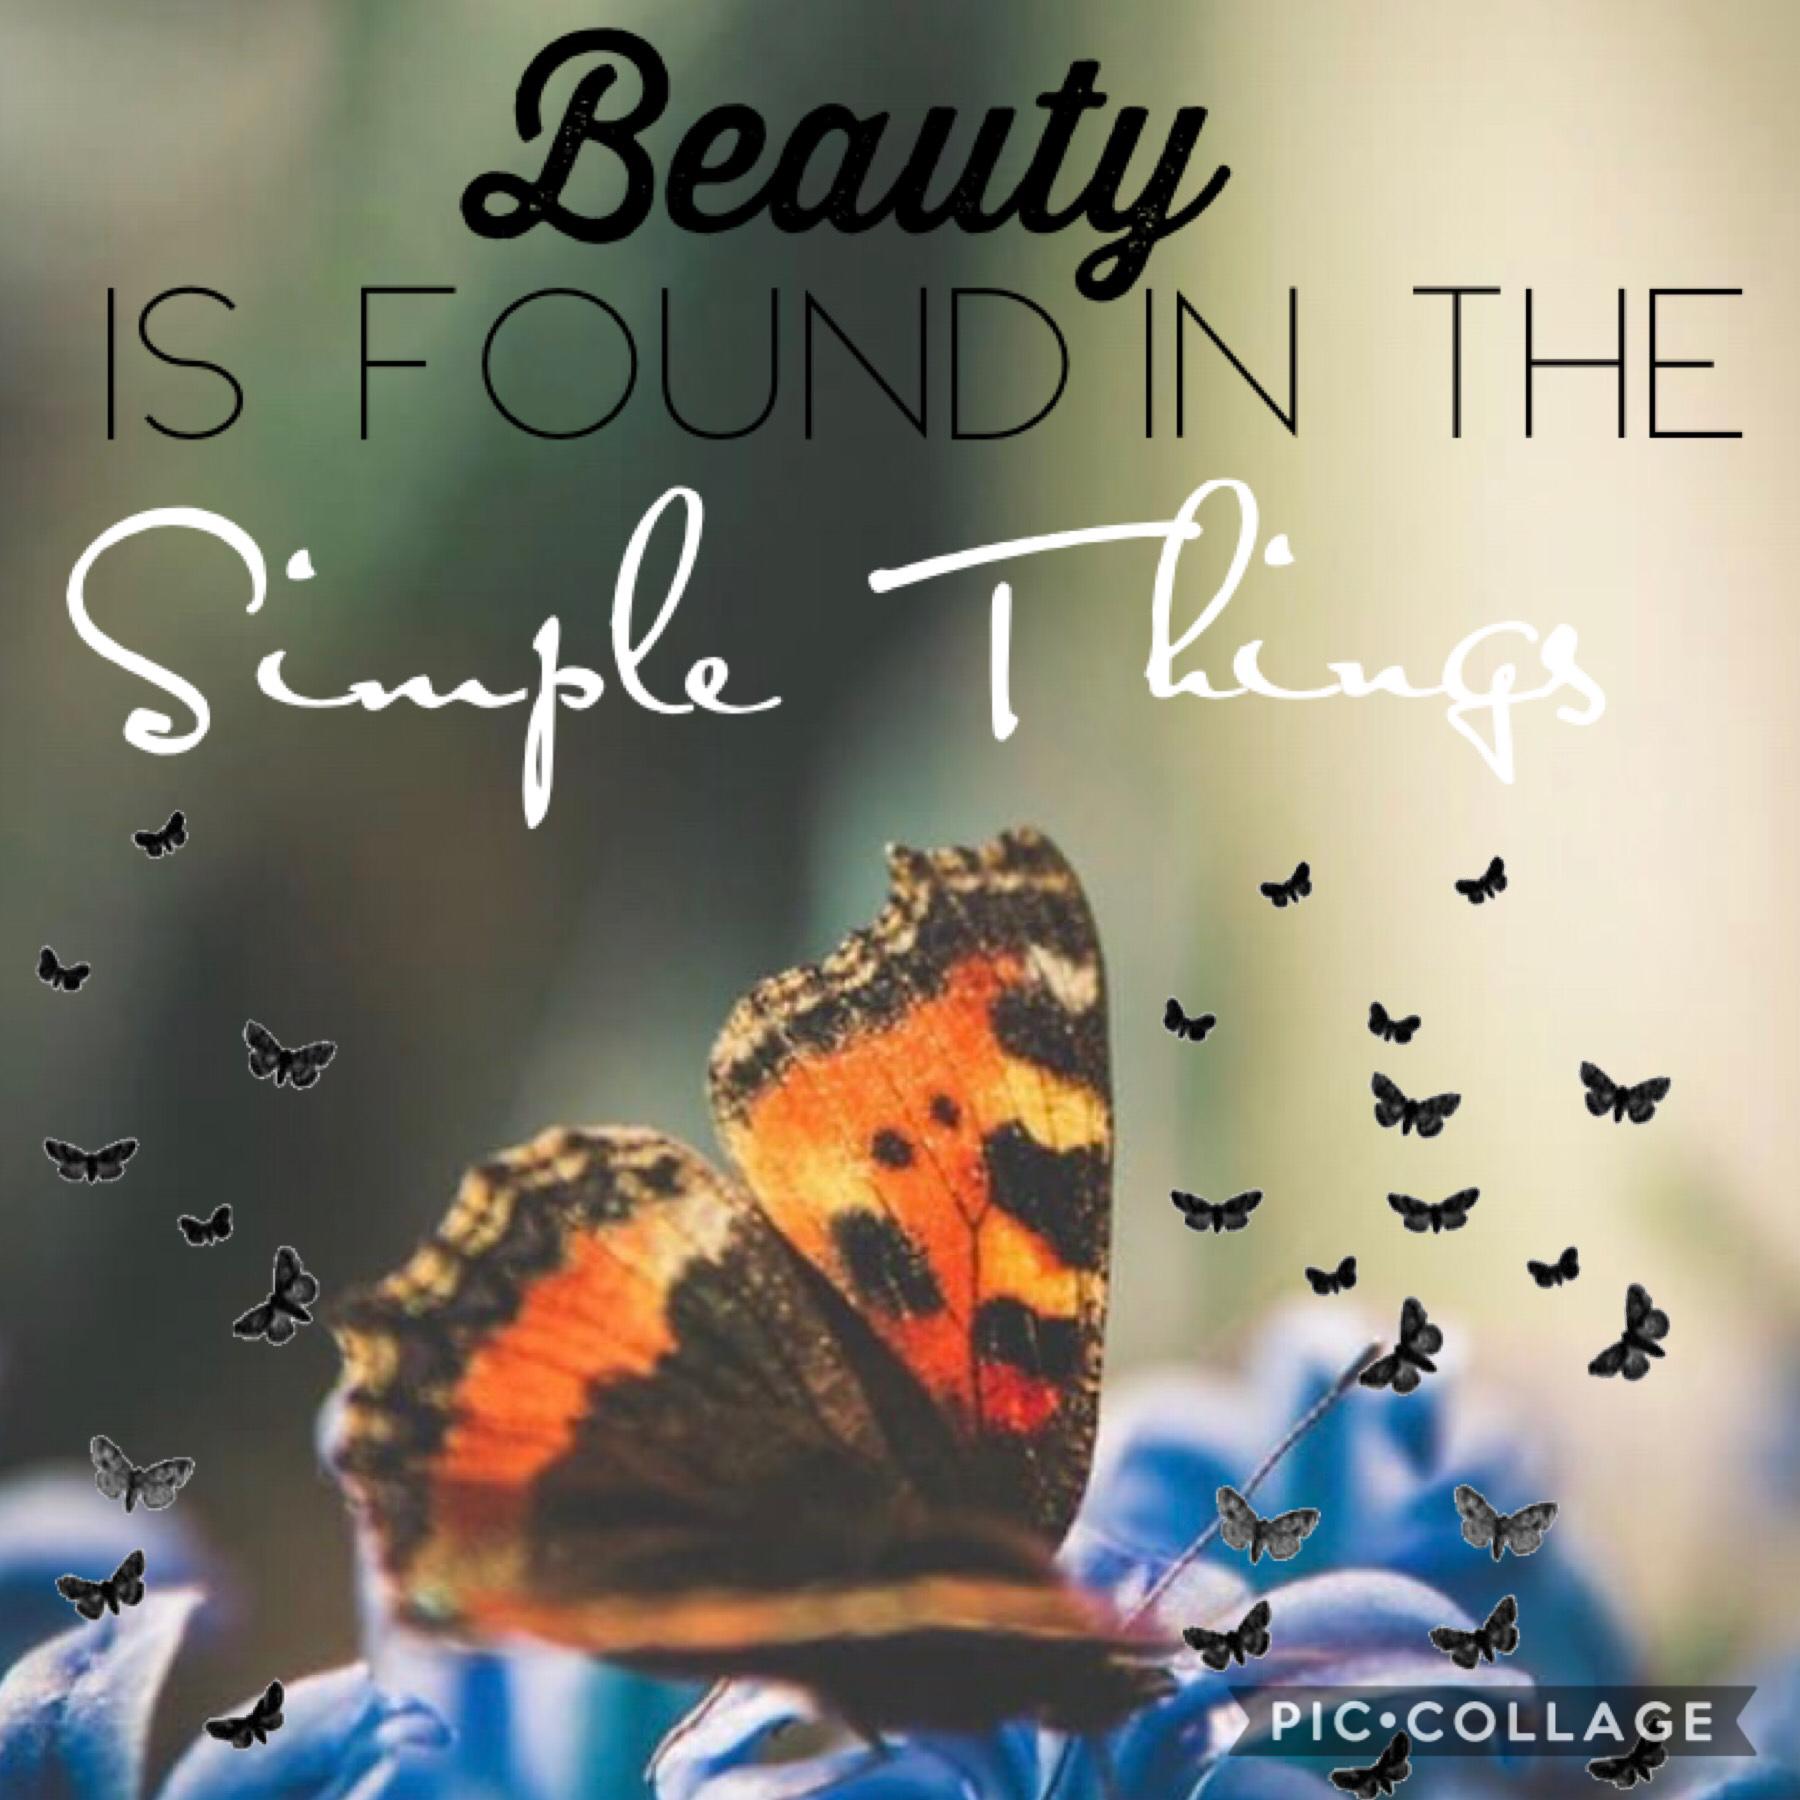 🦋Tappy🦋
Thanks again RiverWillow13 for the backgrounds! I know this isn’t really CHRISTIAN, but I believe posting motivational and positive quotes is important... Thoughts??